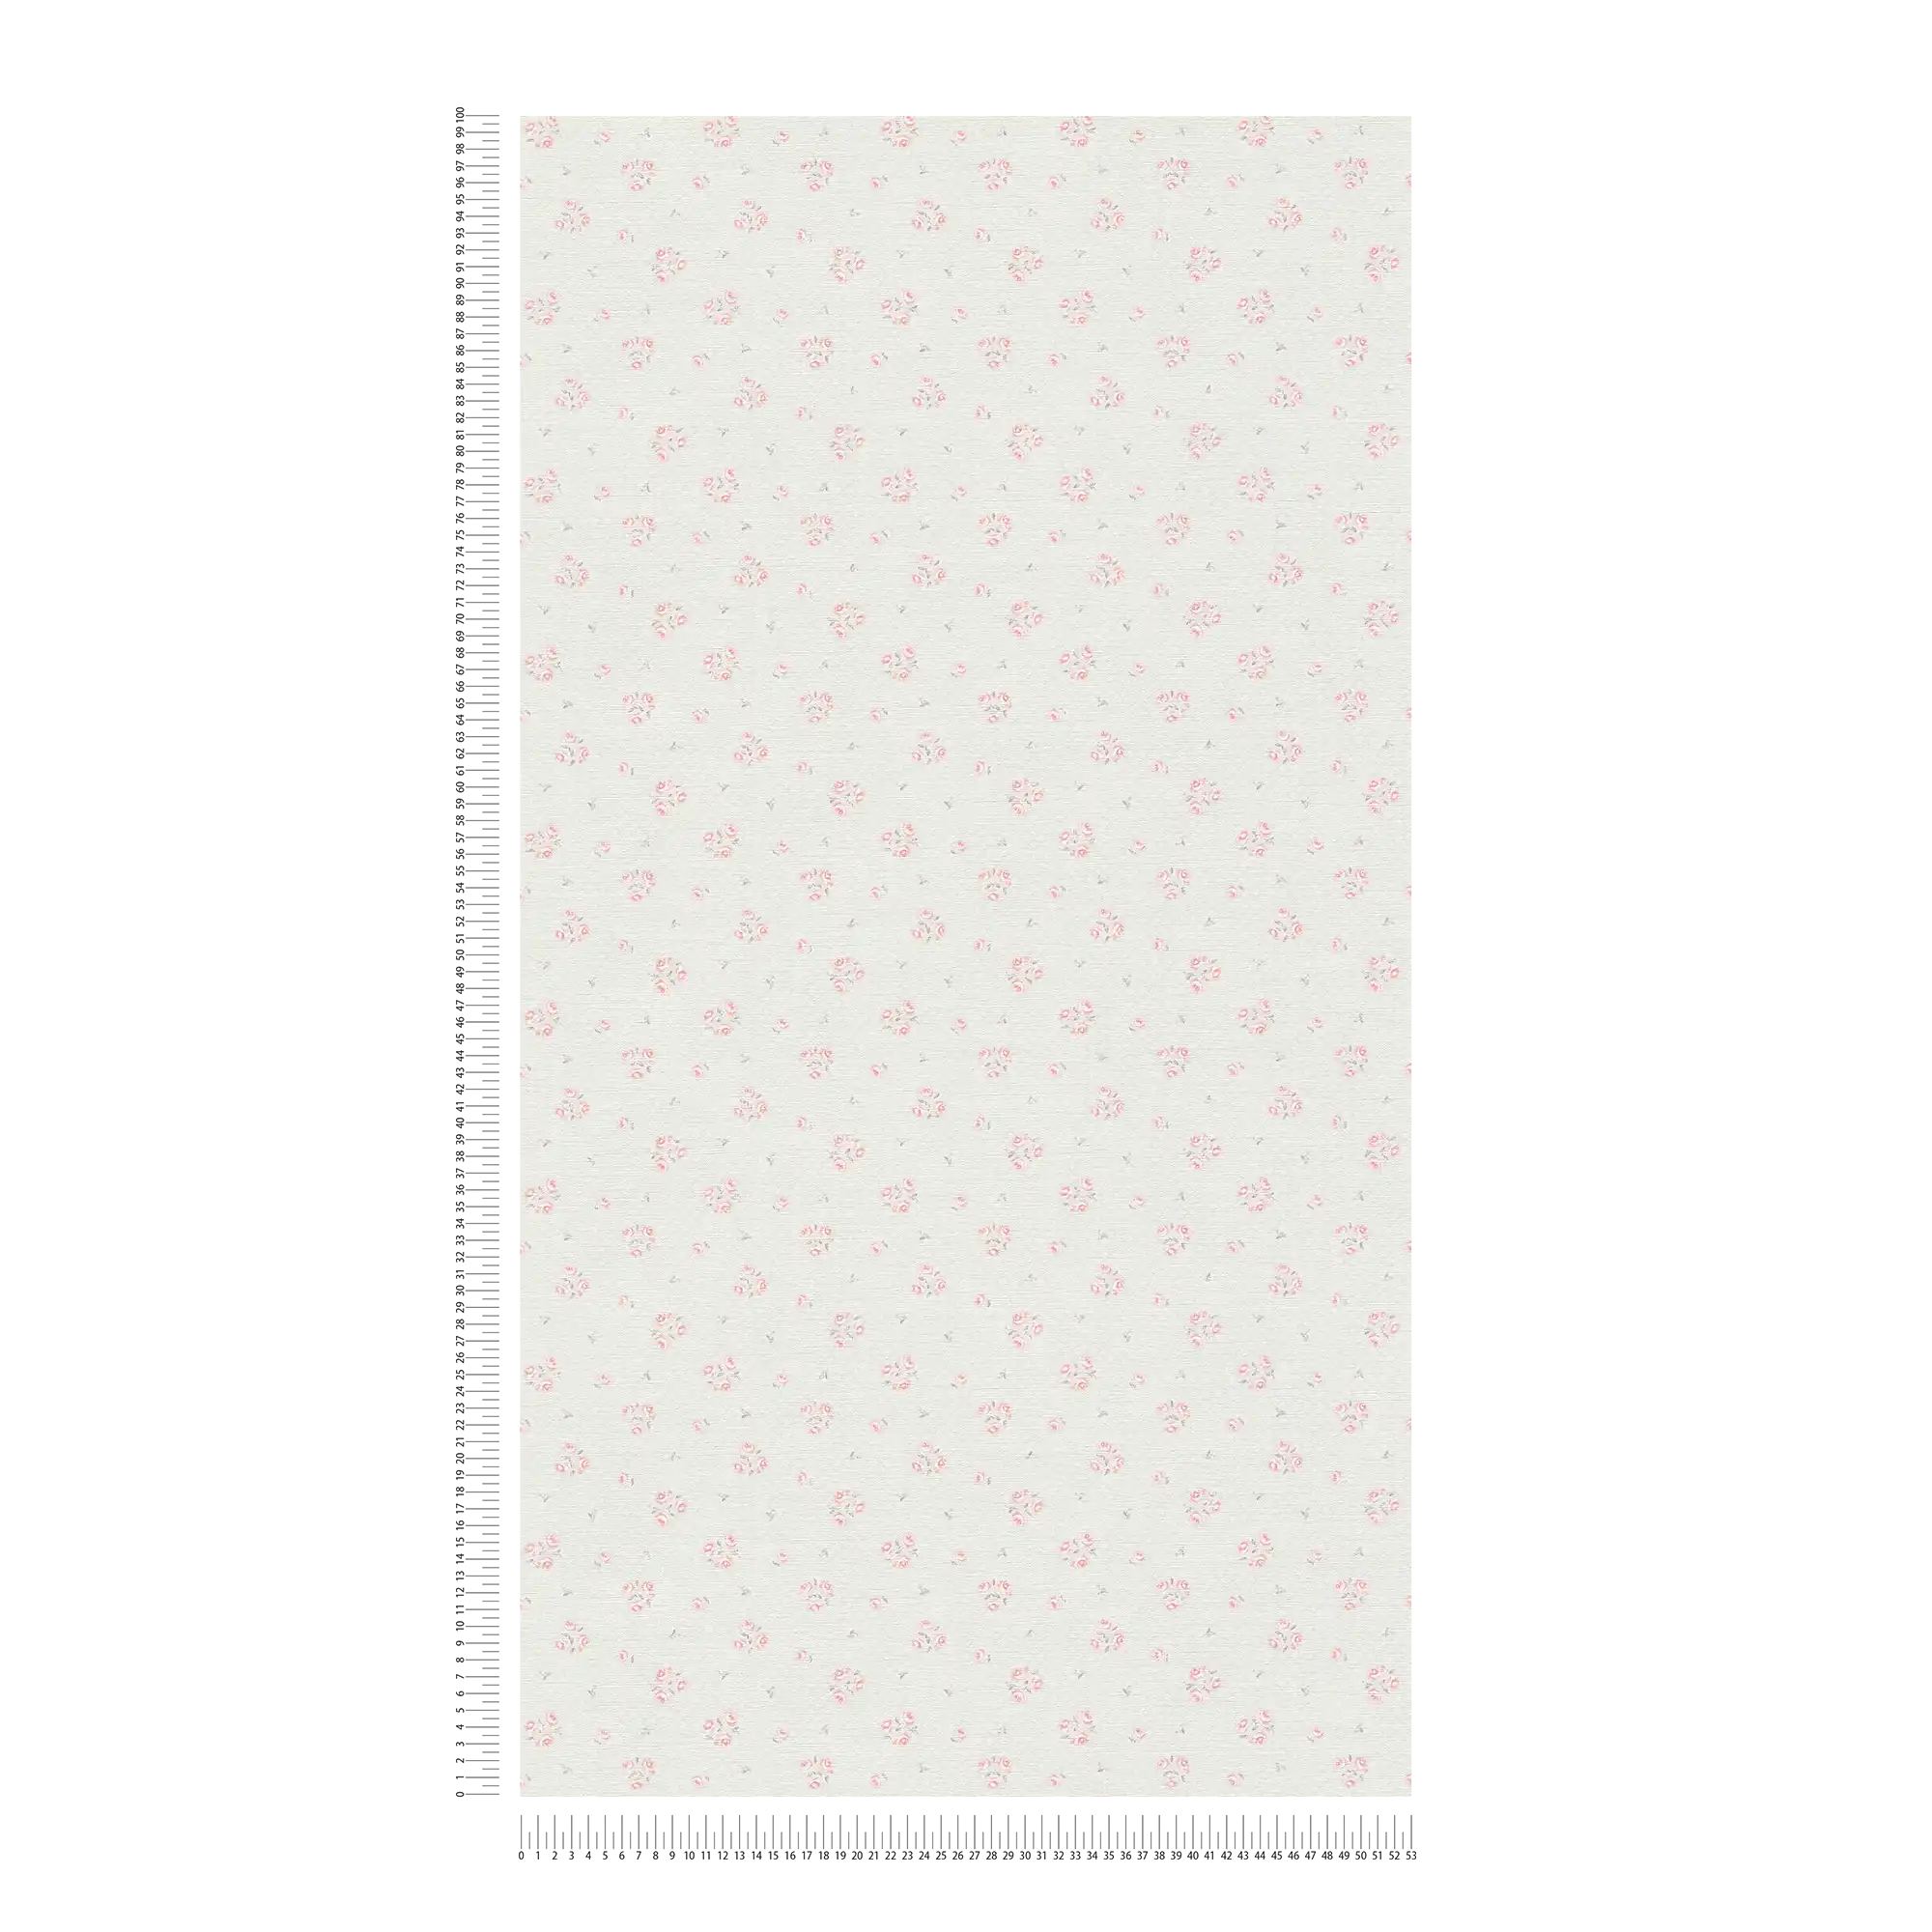             Non-woven wallpaper with fine Shabby Chic floral pattern - light grey, red, white
        